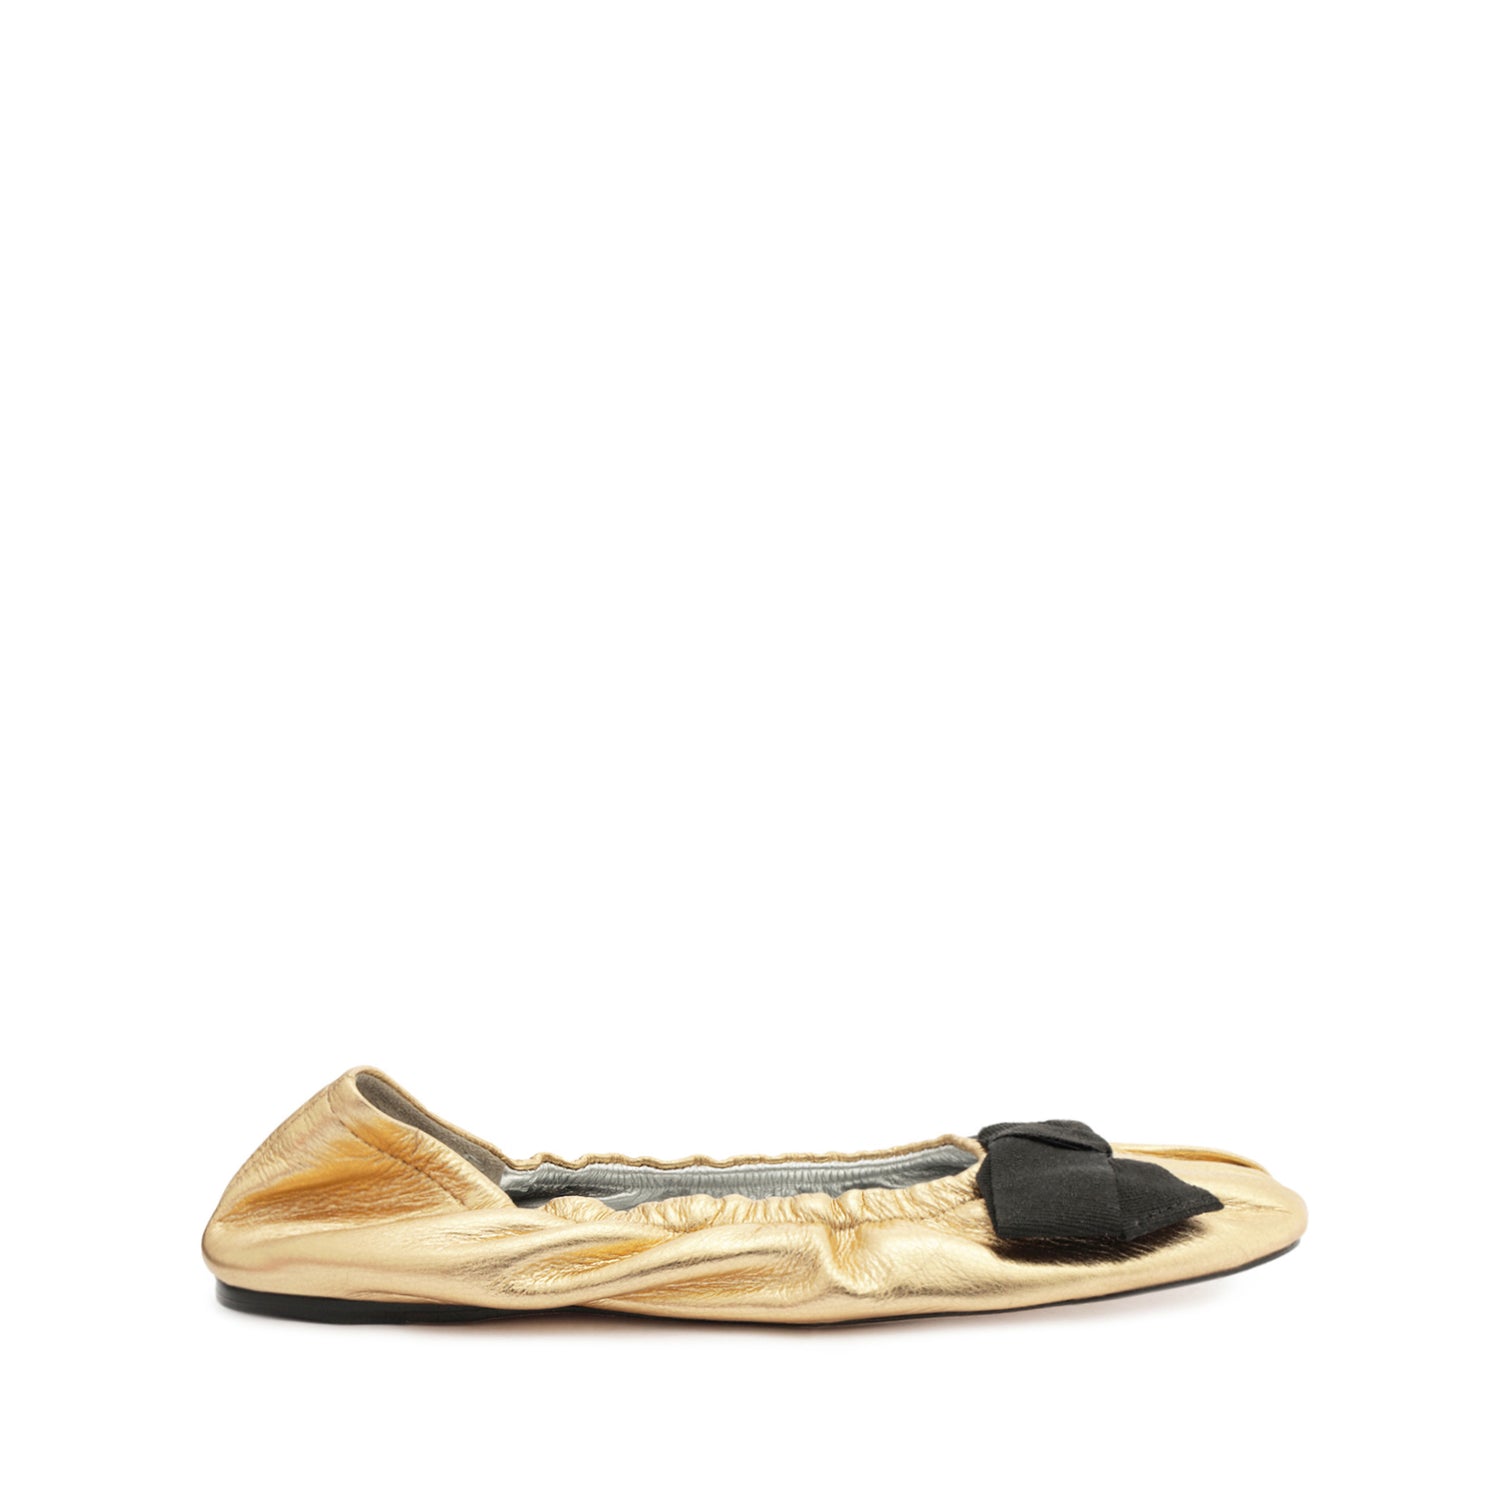 Suzanne Leather Flat Flats Fall 23 5 Gold Calf Leather - Schutz Shoes